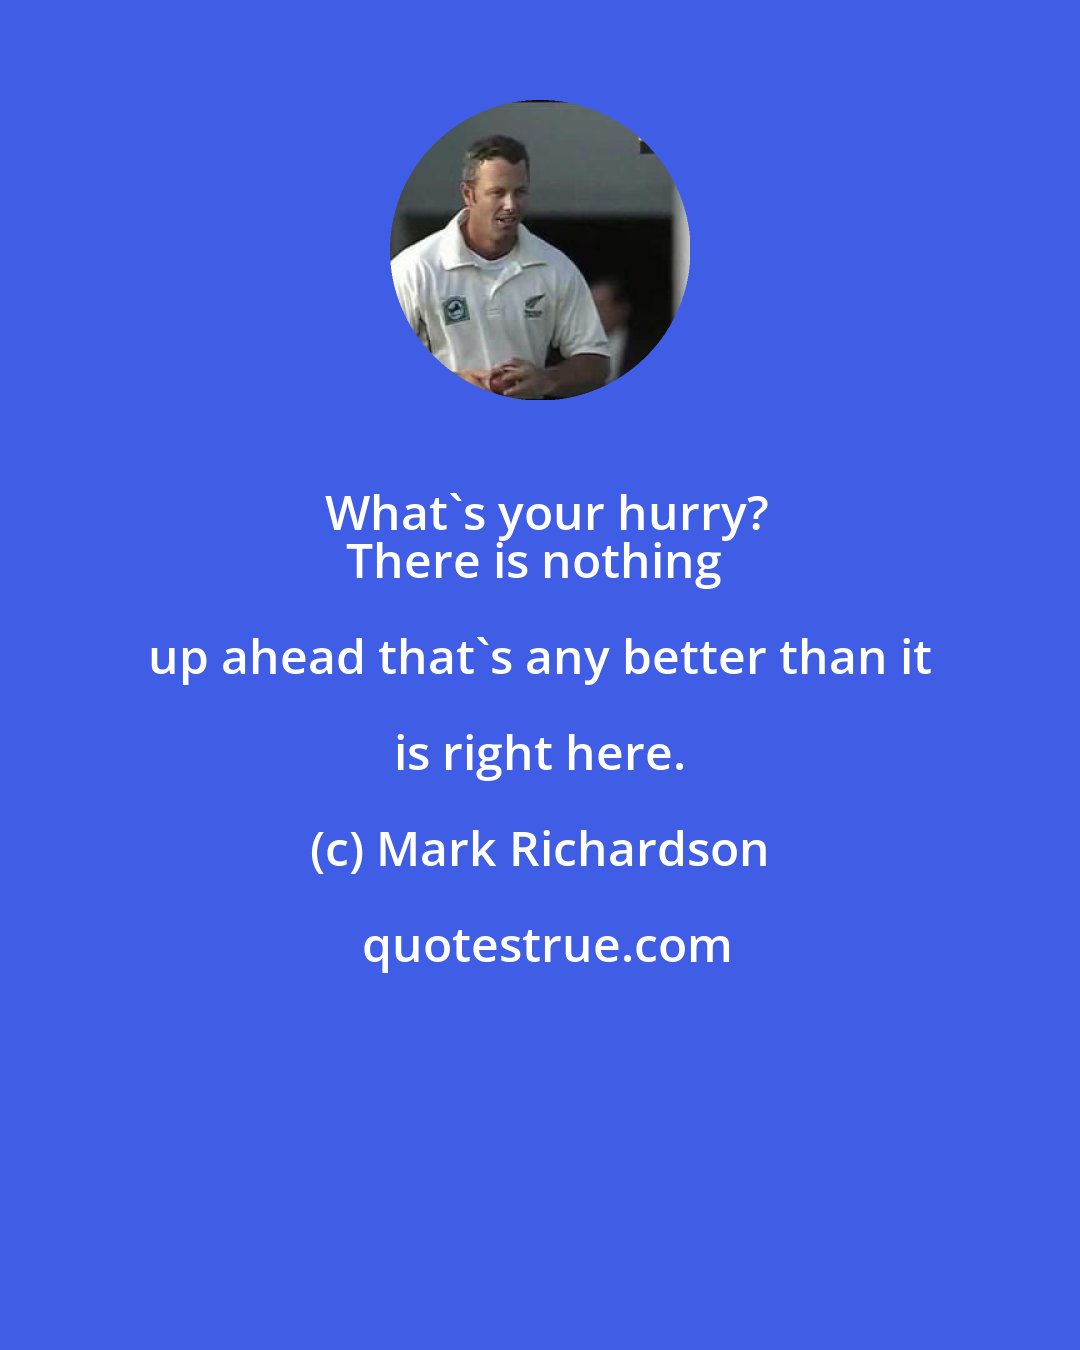 Mark Richardson: What's your hurry?
There is nothing up ahead that's any better than it is right here.